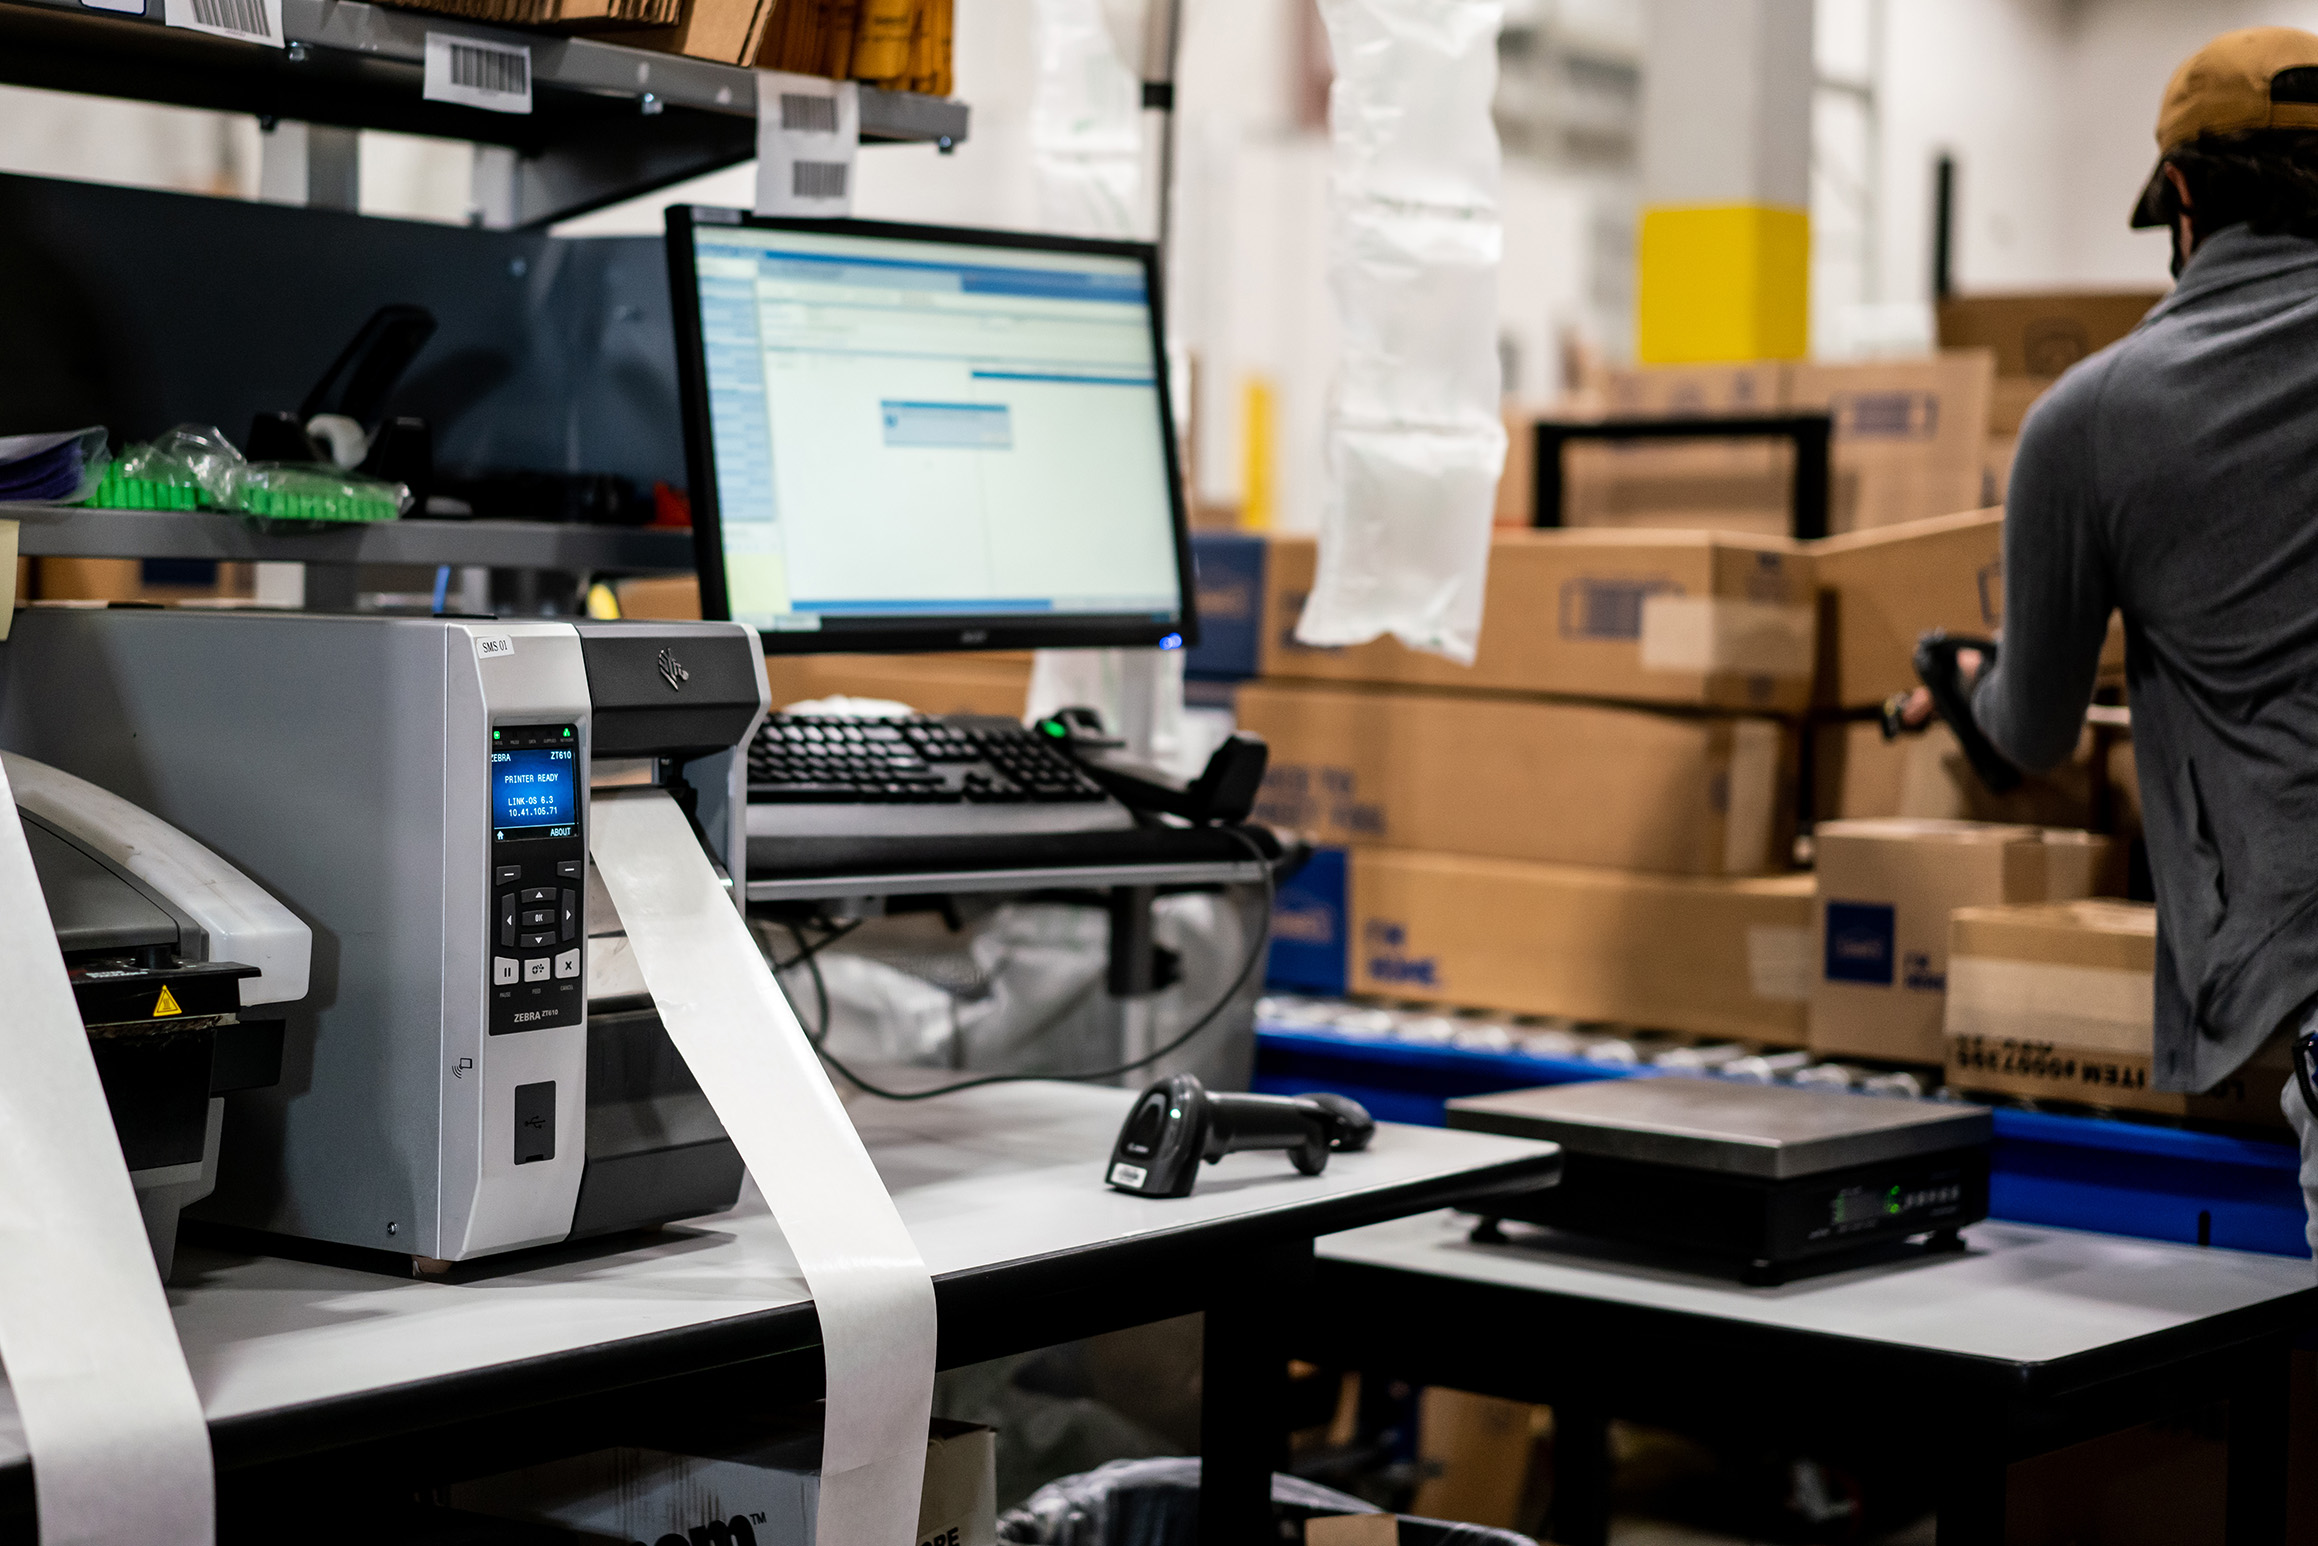 Zebra Barcoding Equipment being used in the warehouse